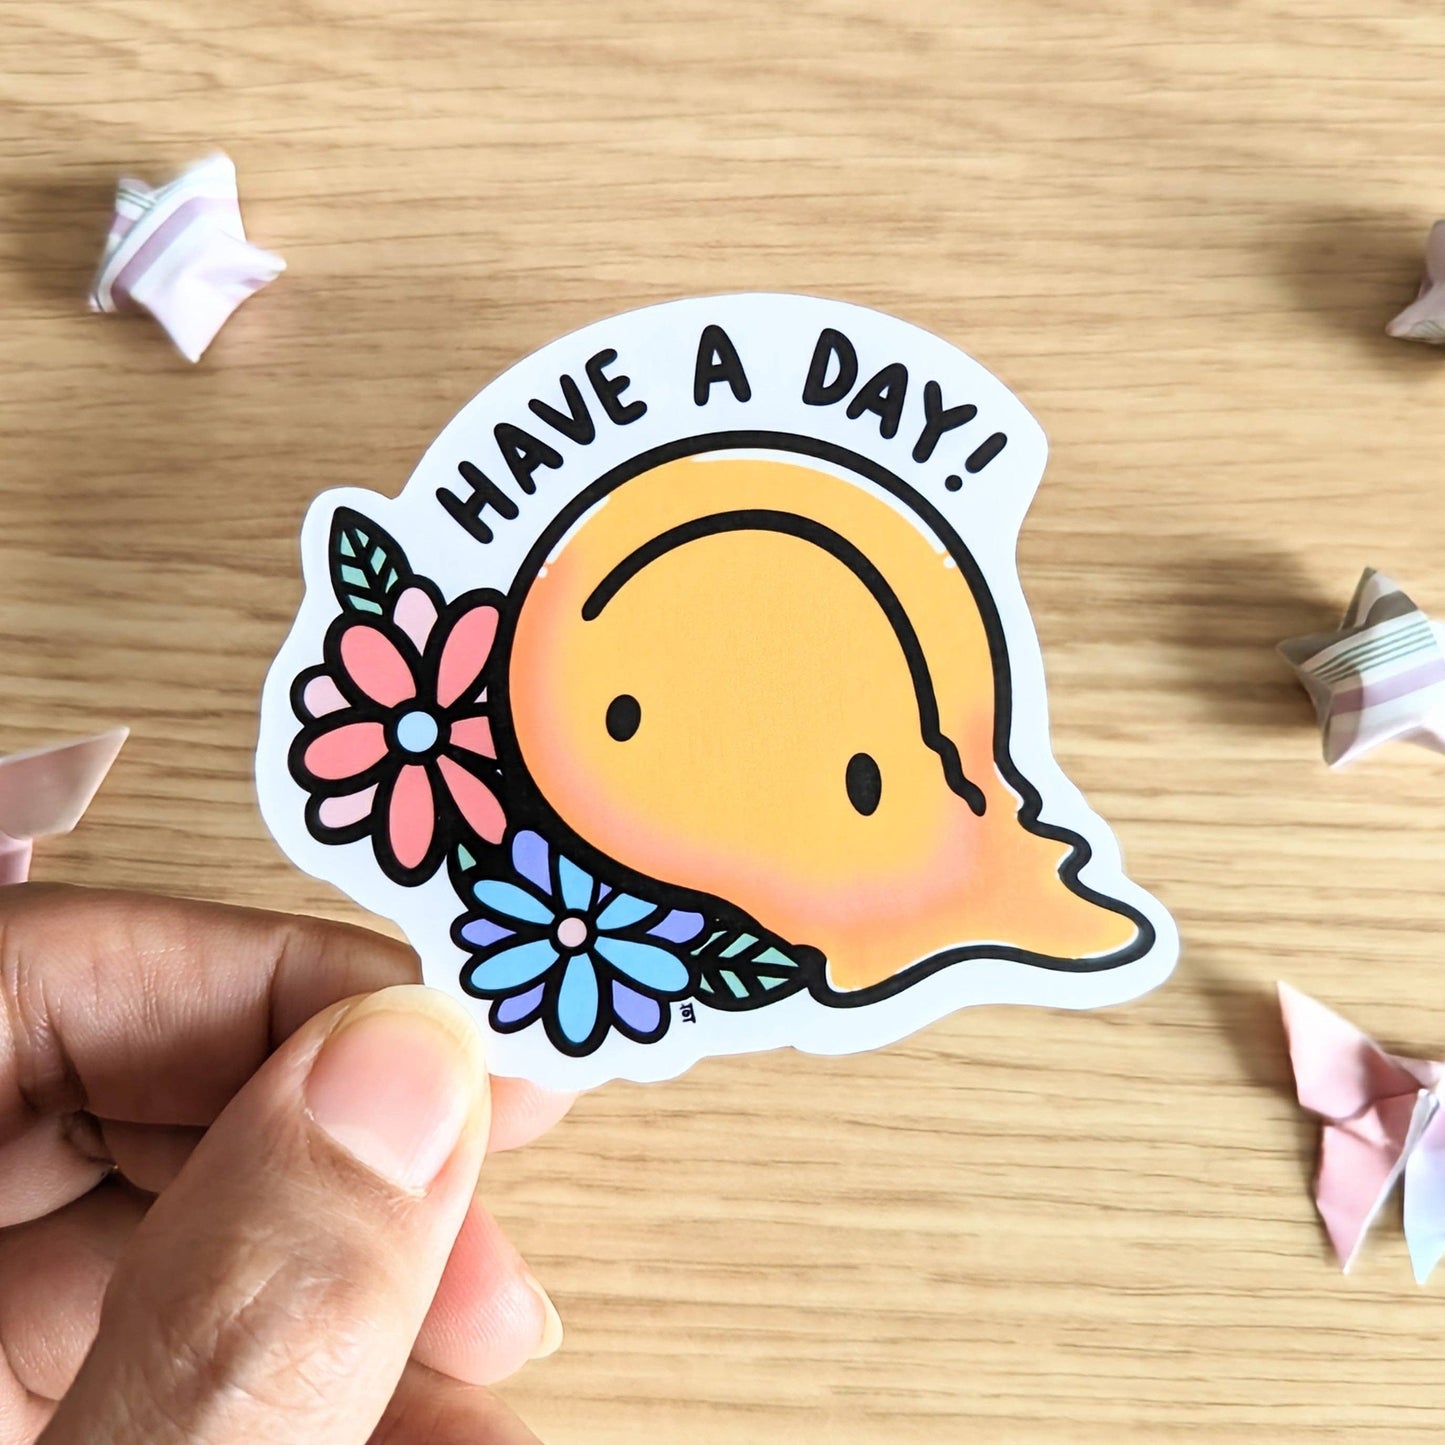 Have a Day! Sticker (waterproof)